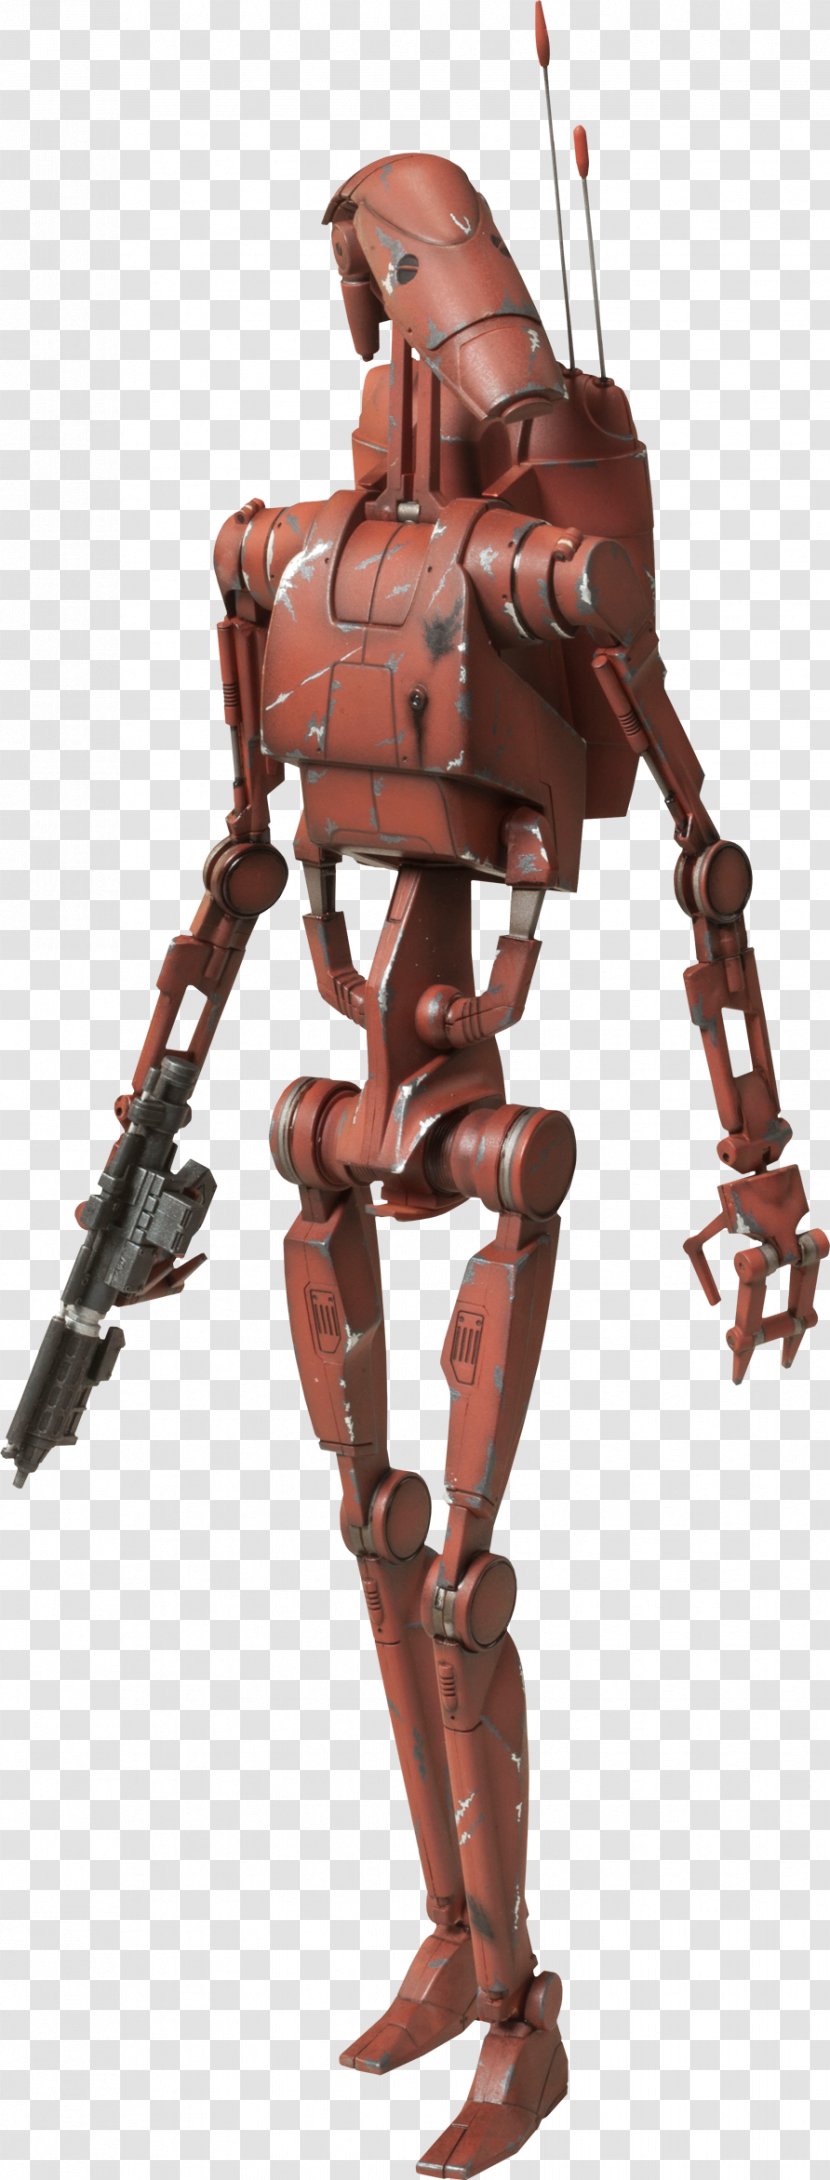 Battle Droid Star Wars: The Clone Wars Han Solo Of Geonosis - Droids - Sci Fi Circuit Board Transparent PNG